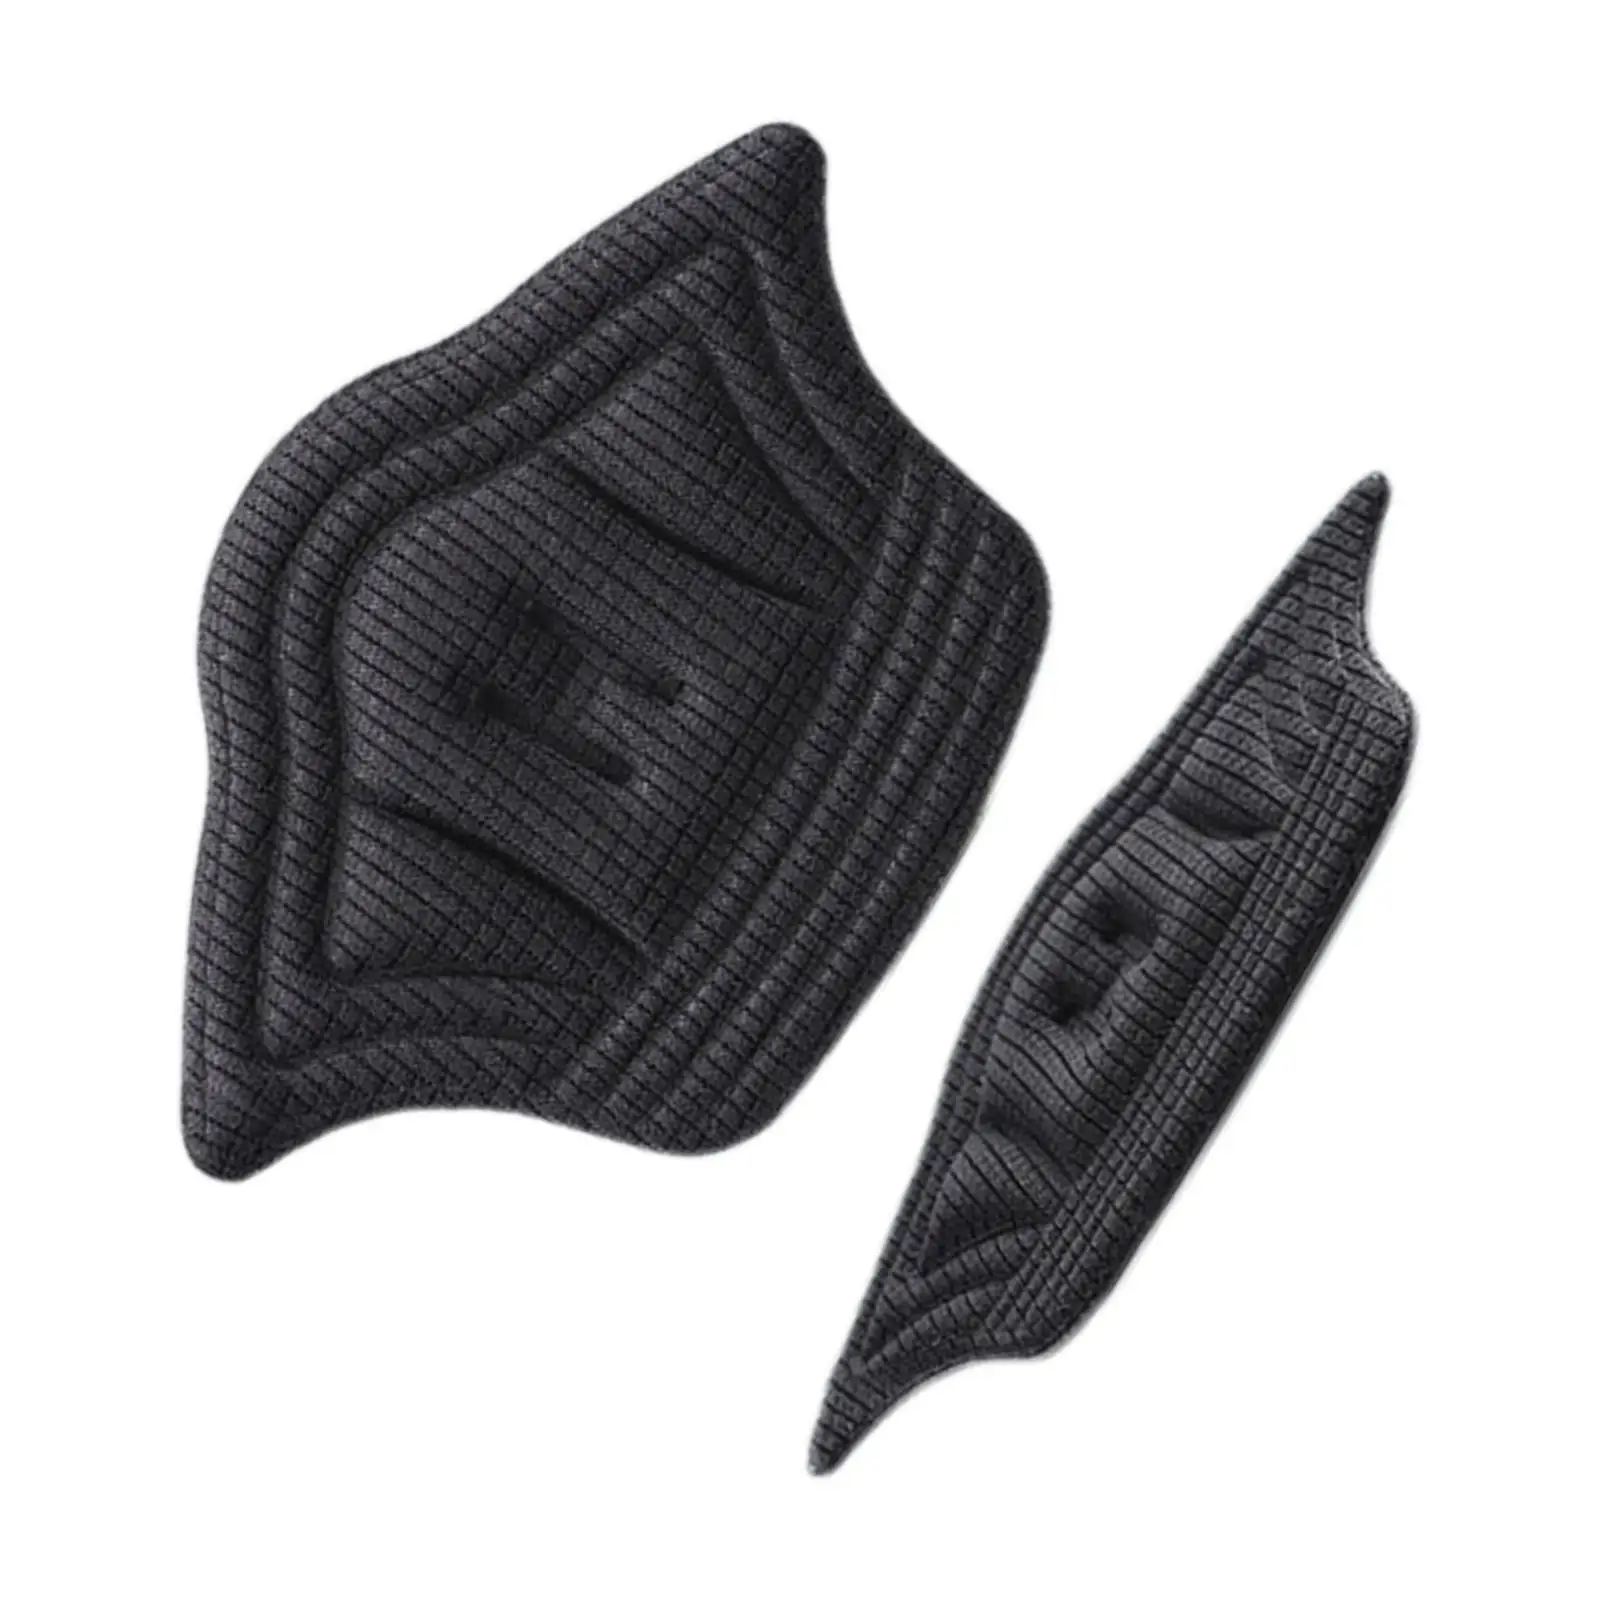 2 Pieces Comfortable Heel Cushion Pads Adjustable Heel Guards Liners Grips Shoes Loose Shoes Women and Men Improved